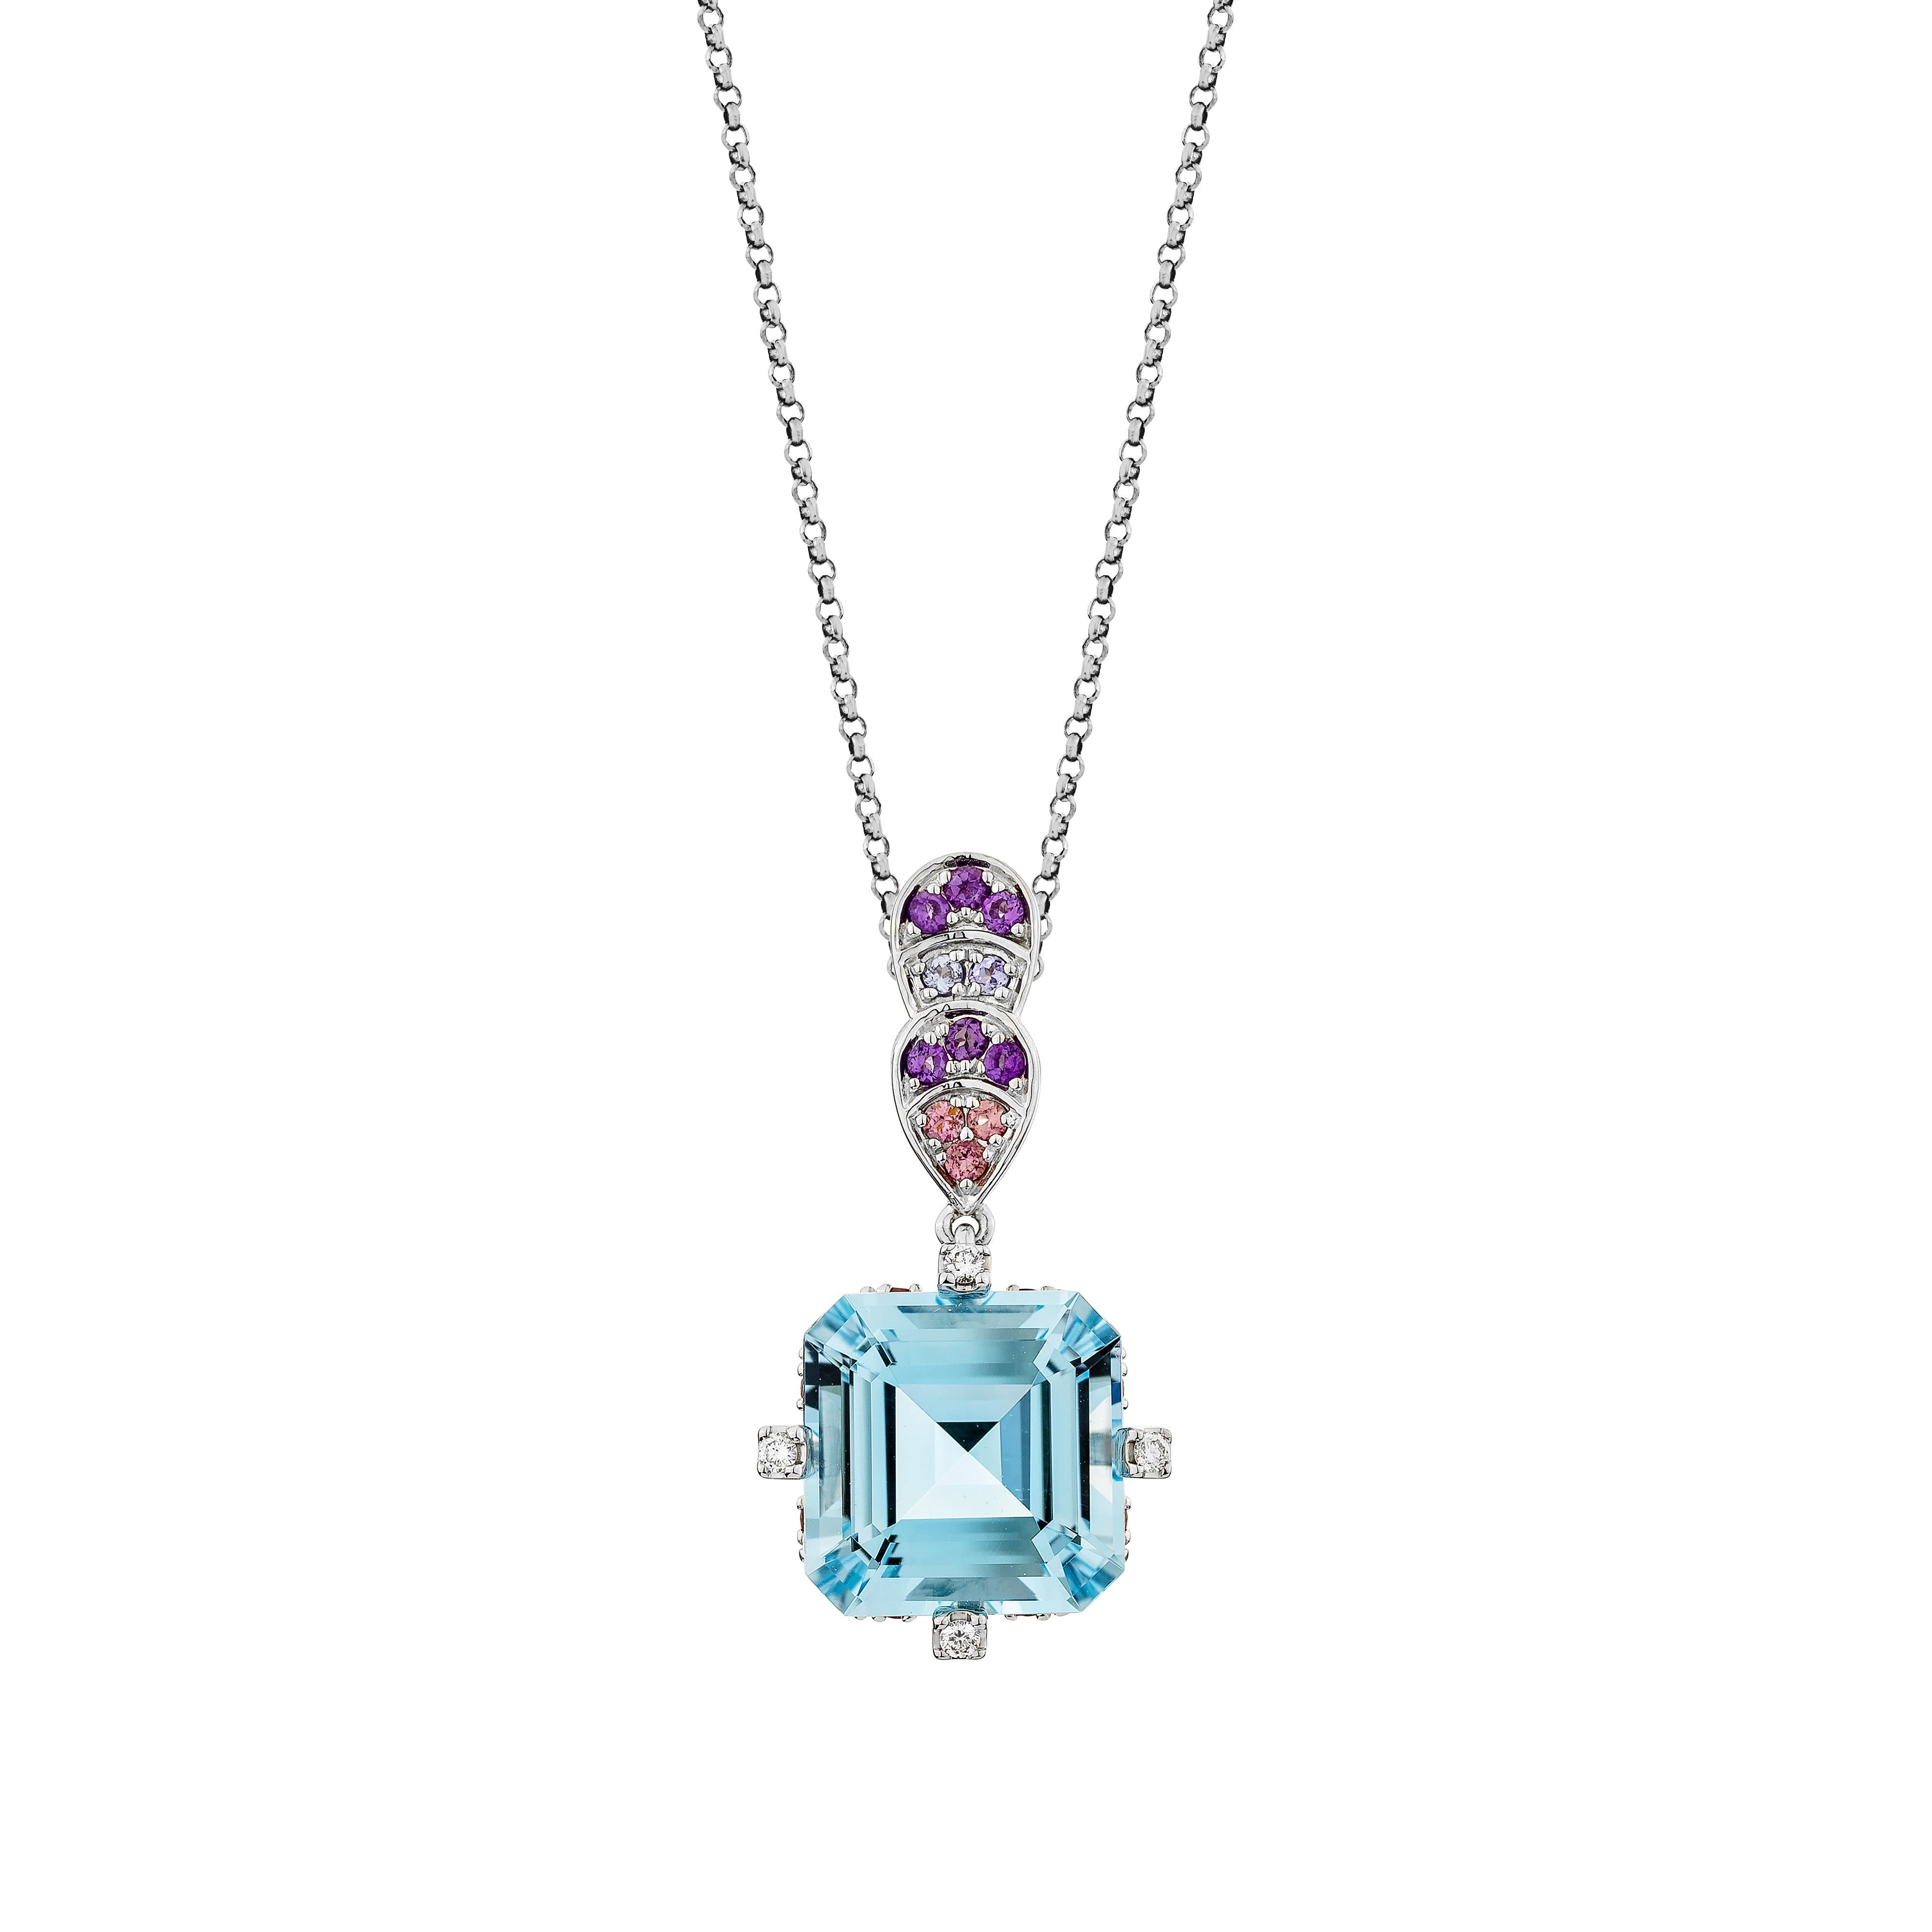 Octagon Cut 9.25 Carat Swiss Blue Topaz Pendant in 18KWG with Multi Gemstone and Diamond. For Sale